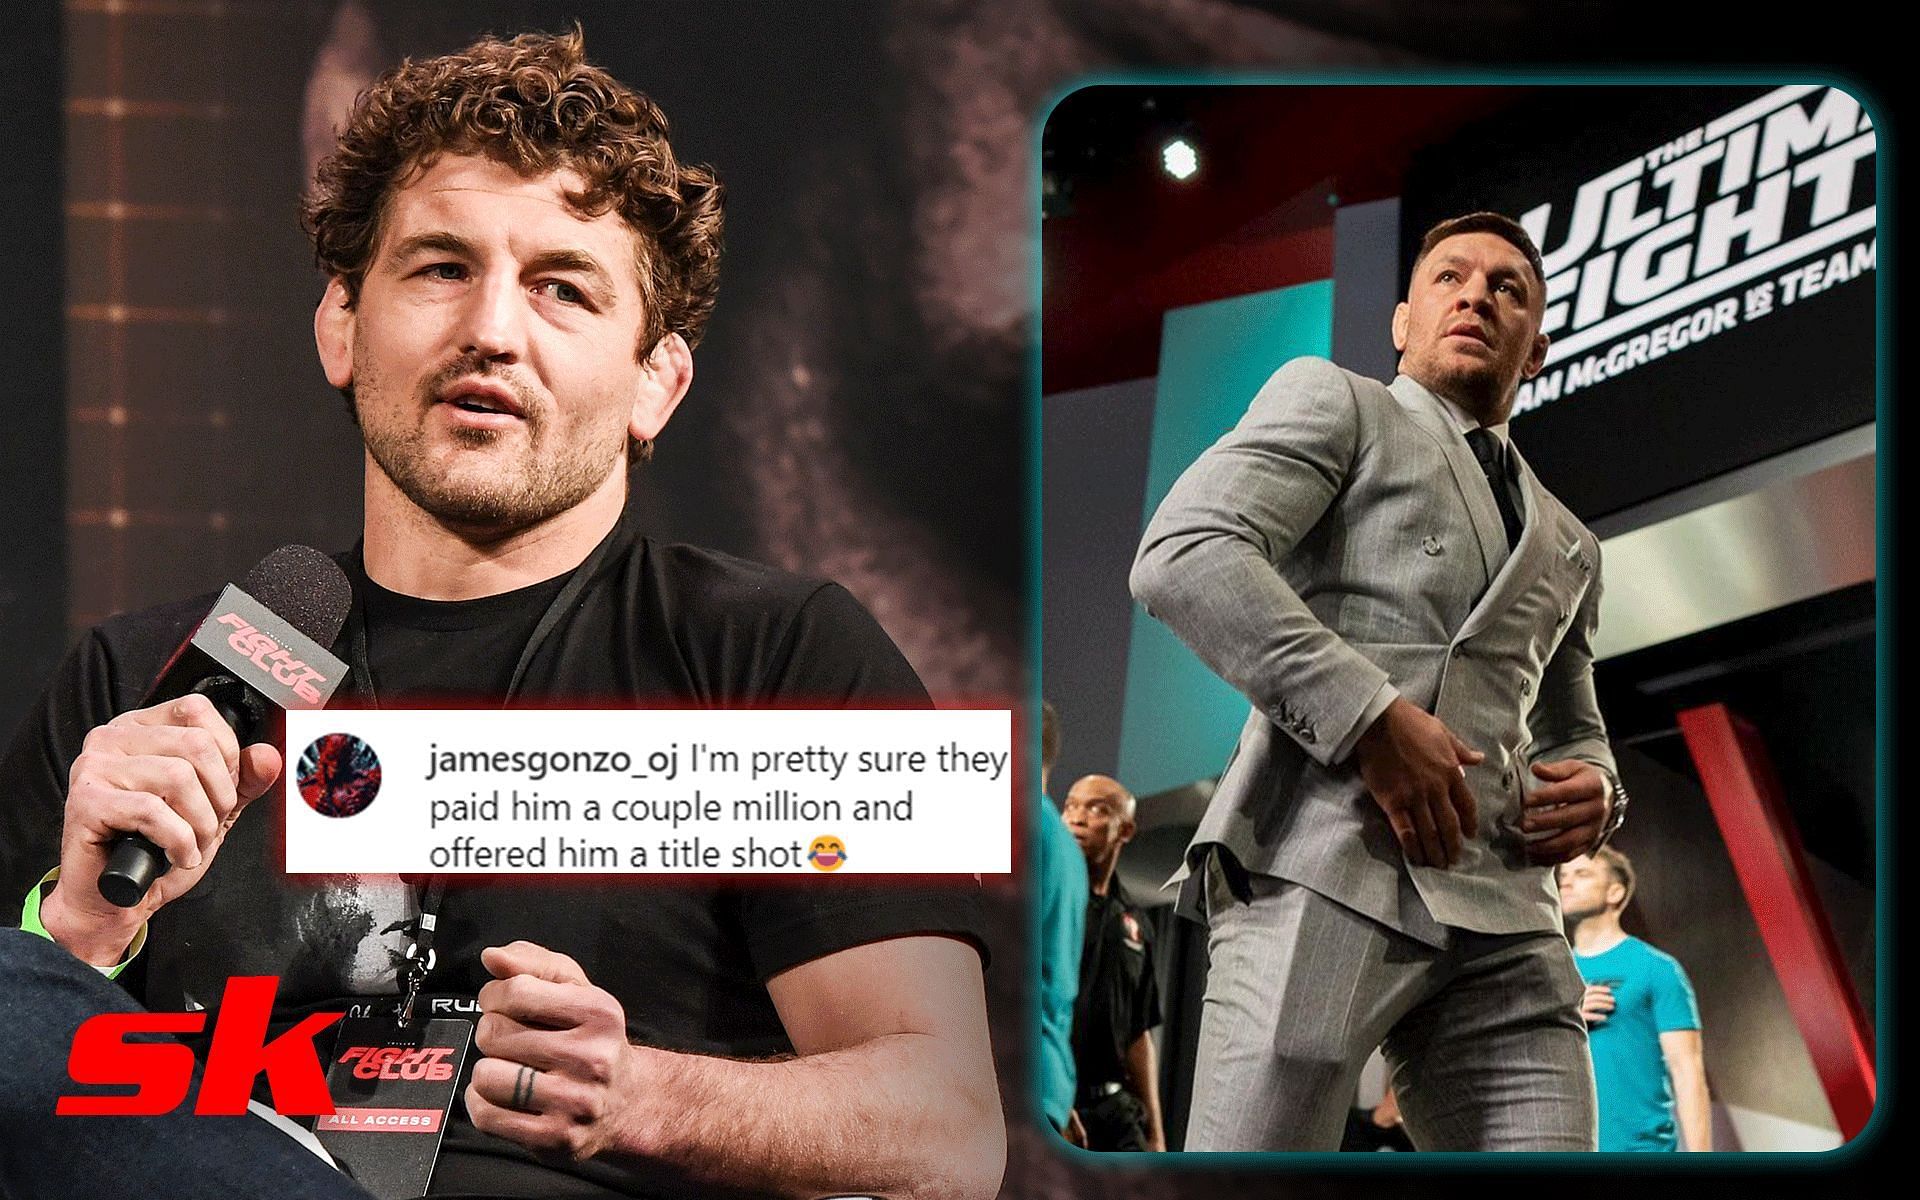 Ben Askren and Conor McGregor [image credits: Getty Images and @ultimatefighter on Instagram]